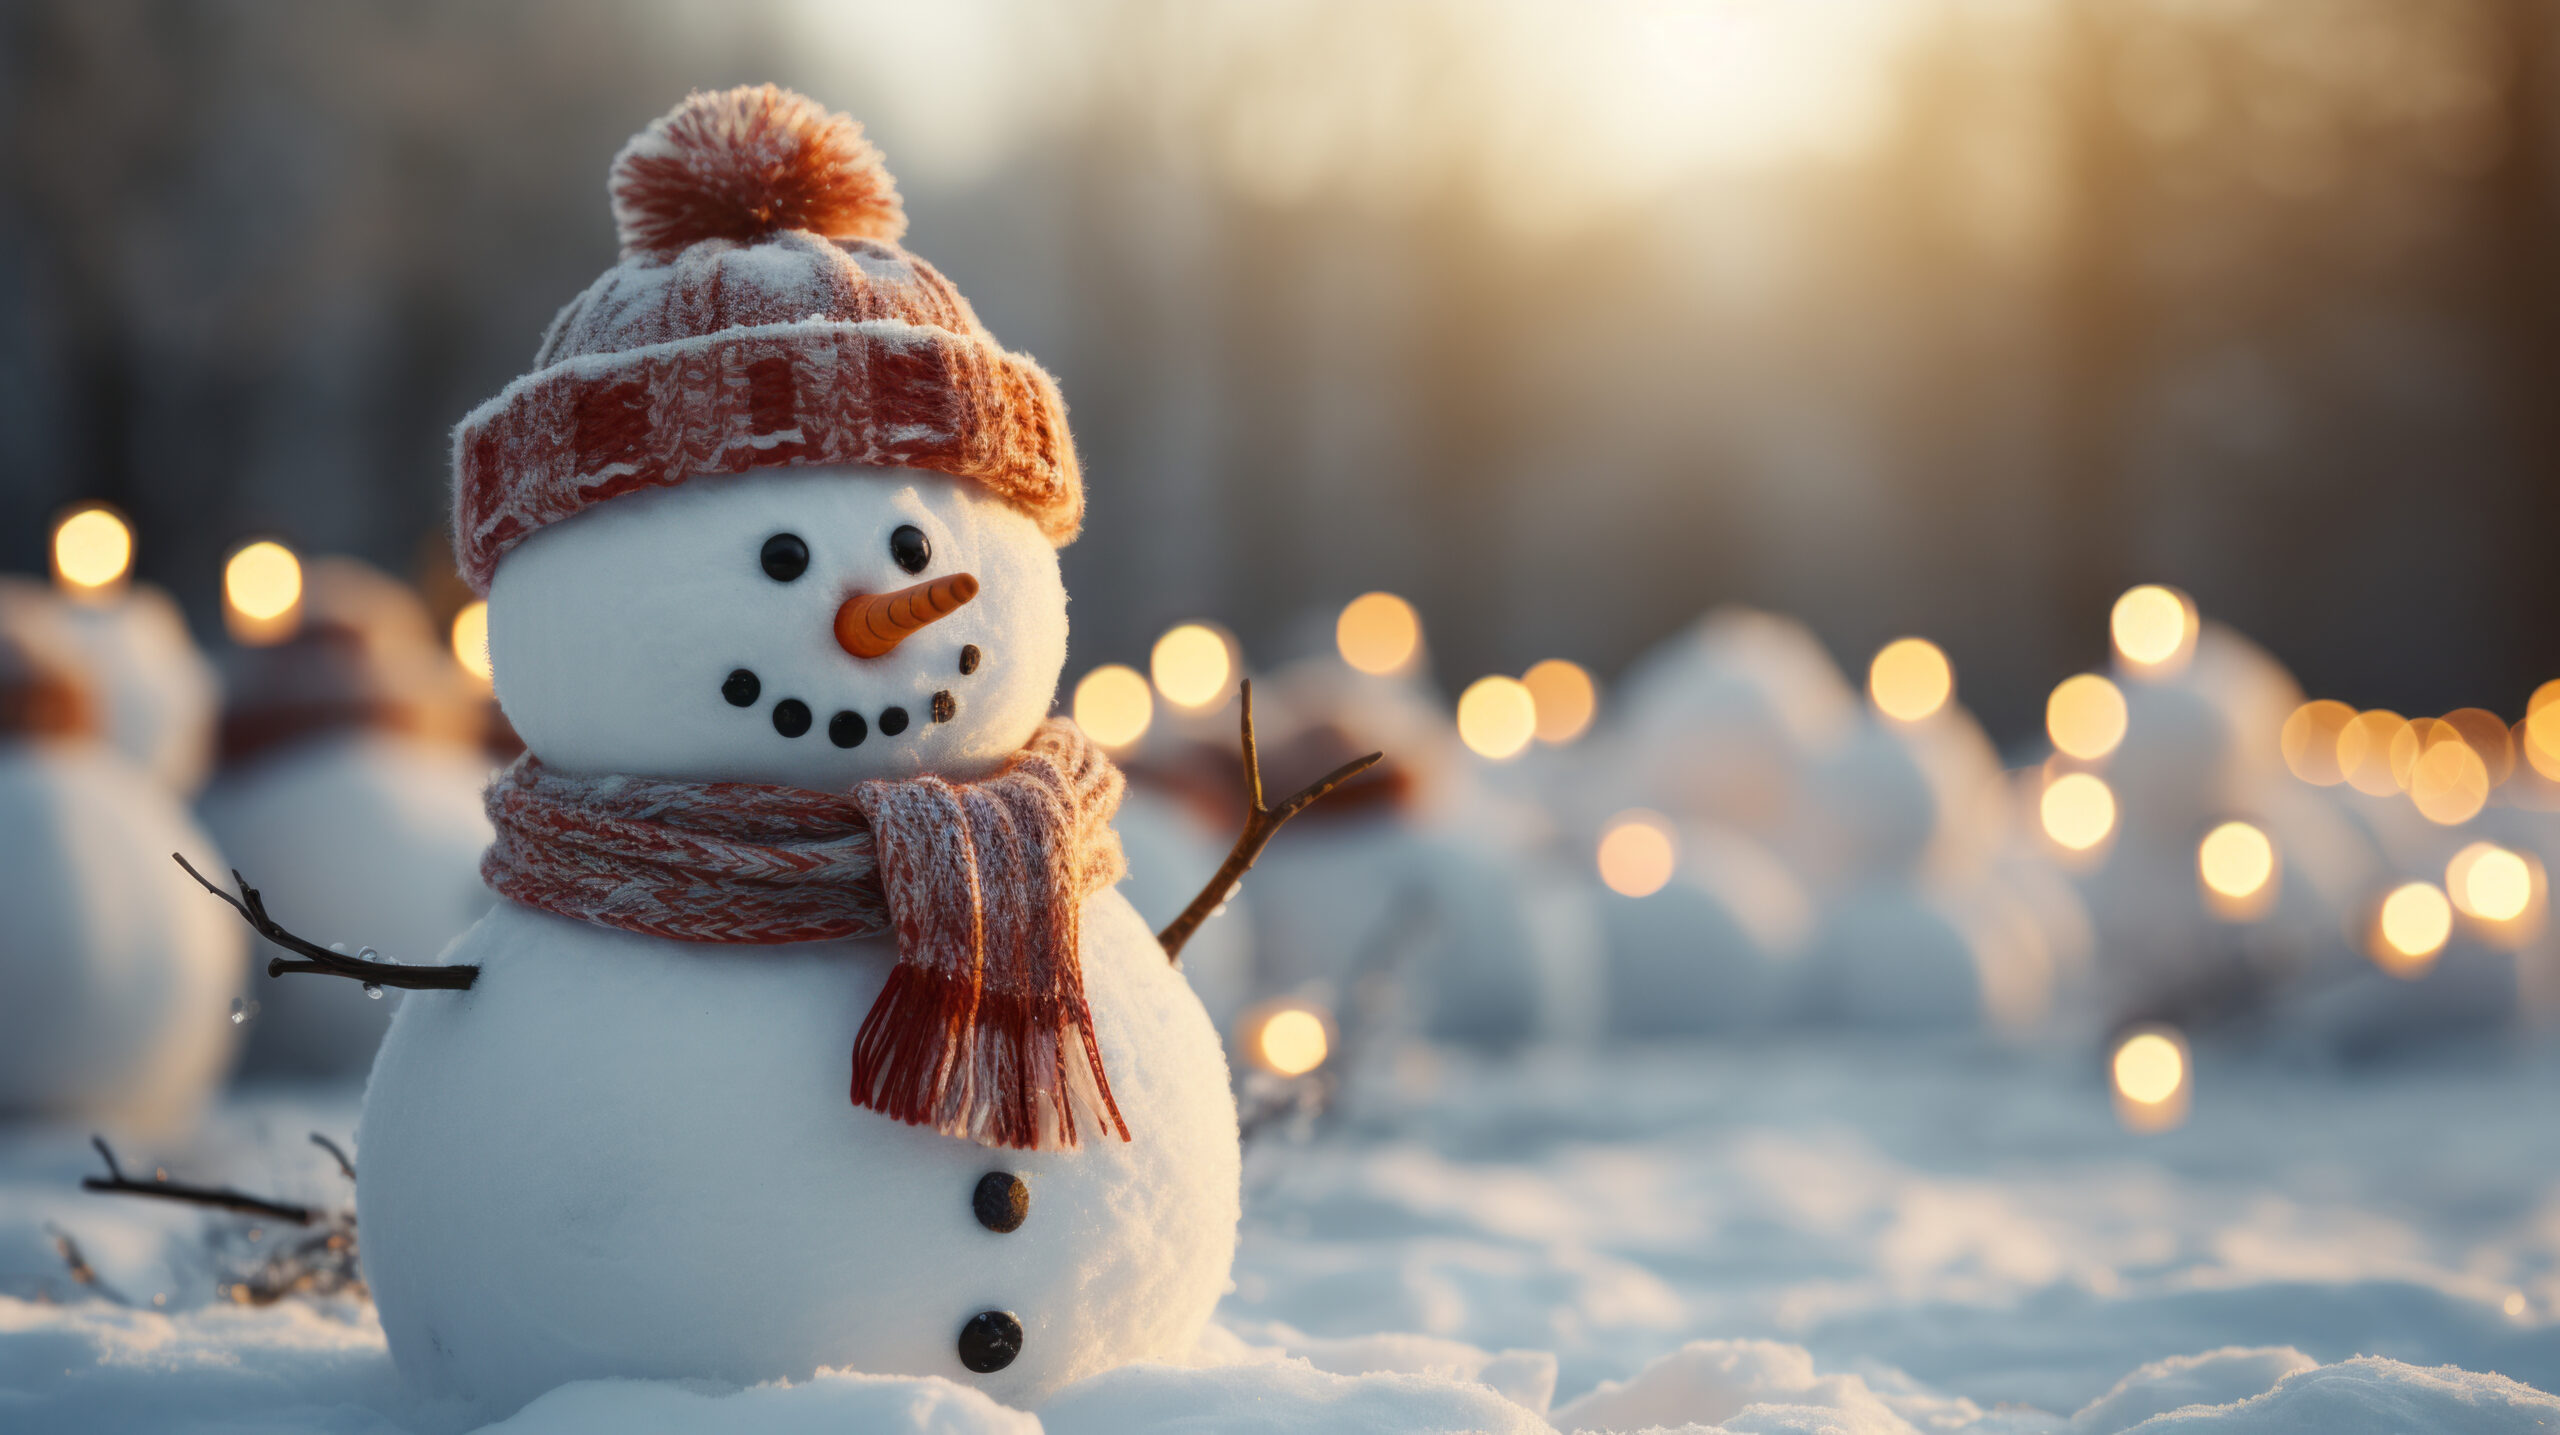 Small snowman wearing a red hat and scarf. In the background, snow and twinkle lights